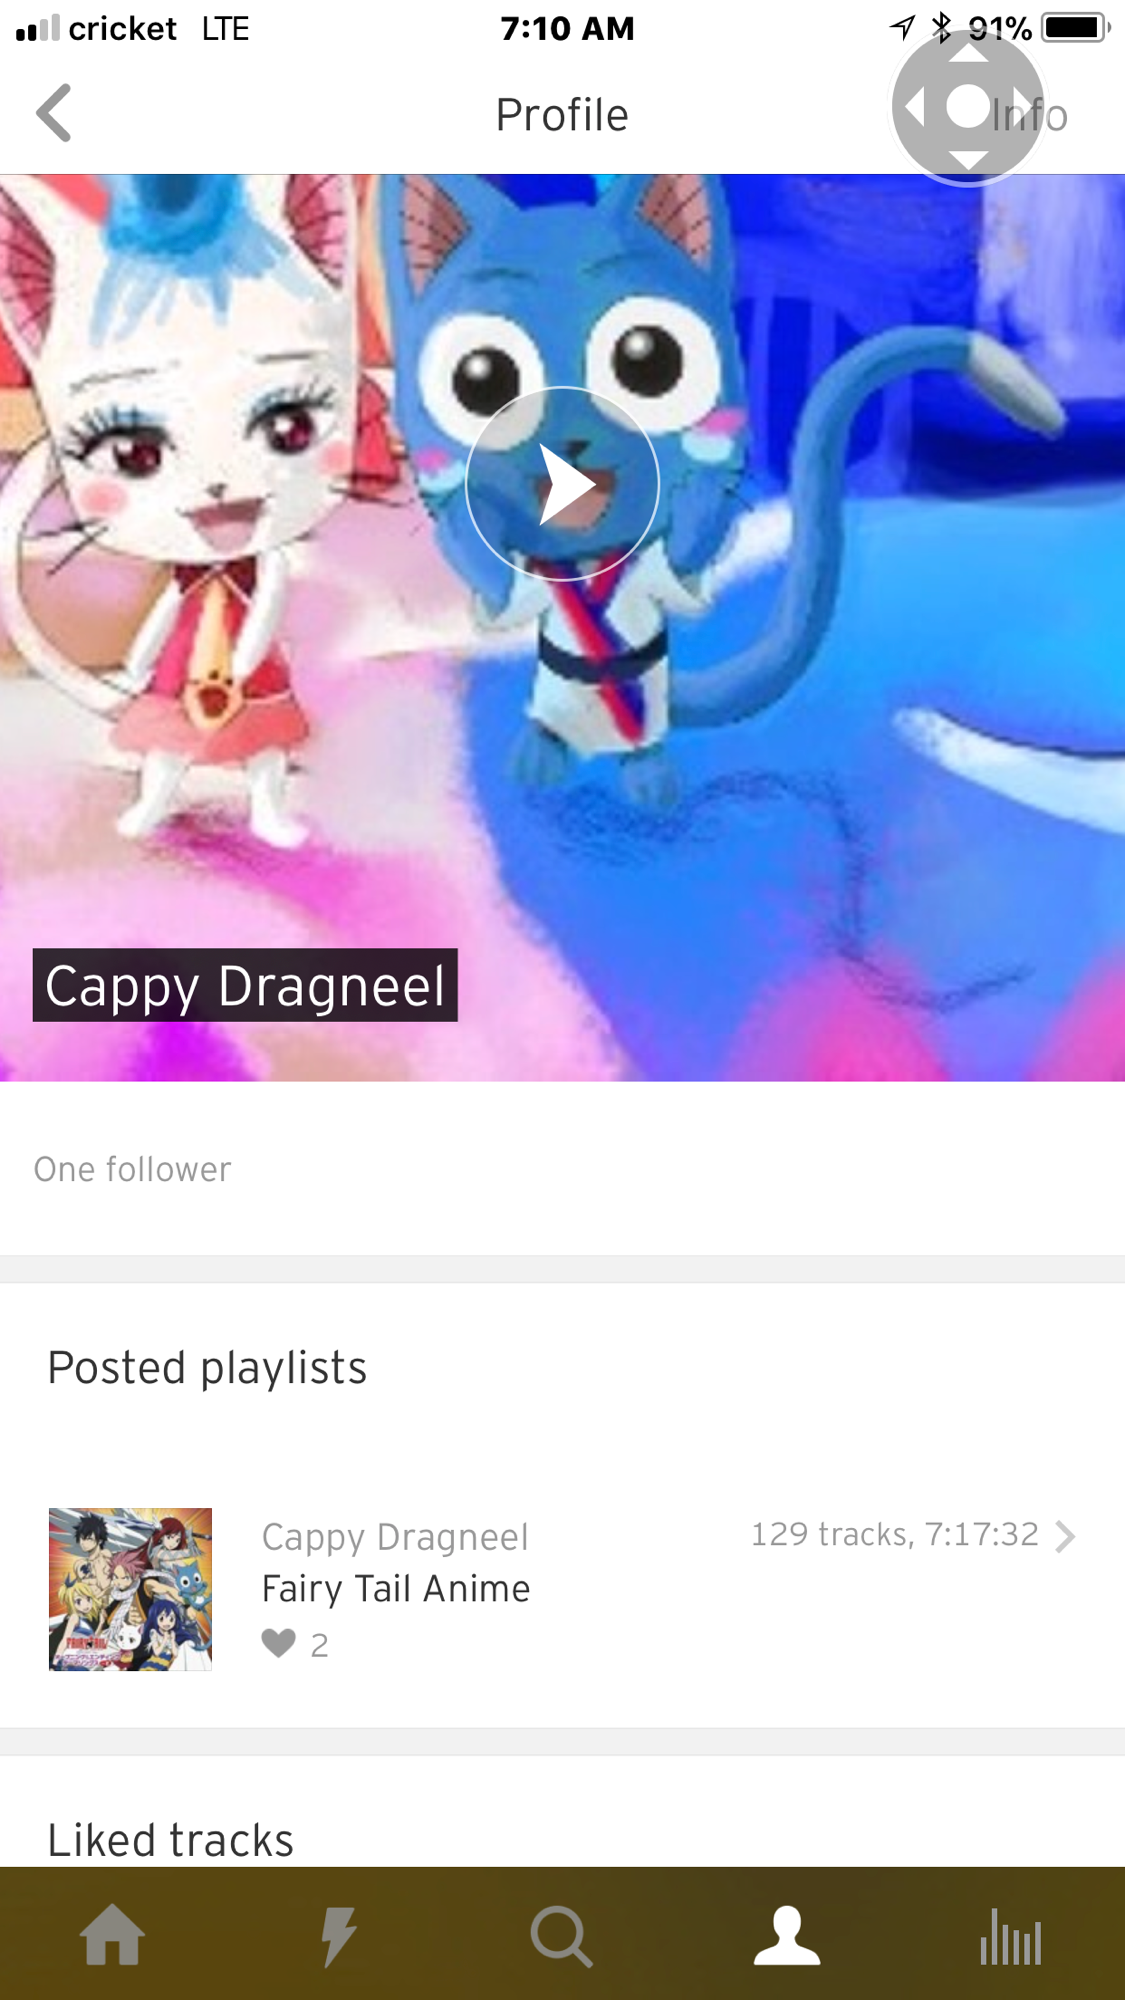 Stream Cappy Dragneel  Listen to Fairy Tail Anime playlist online for free  on SoundCloud